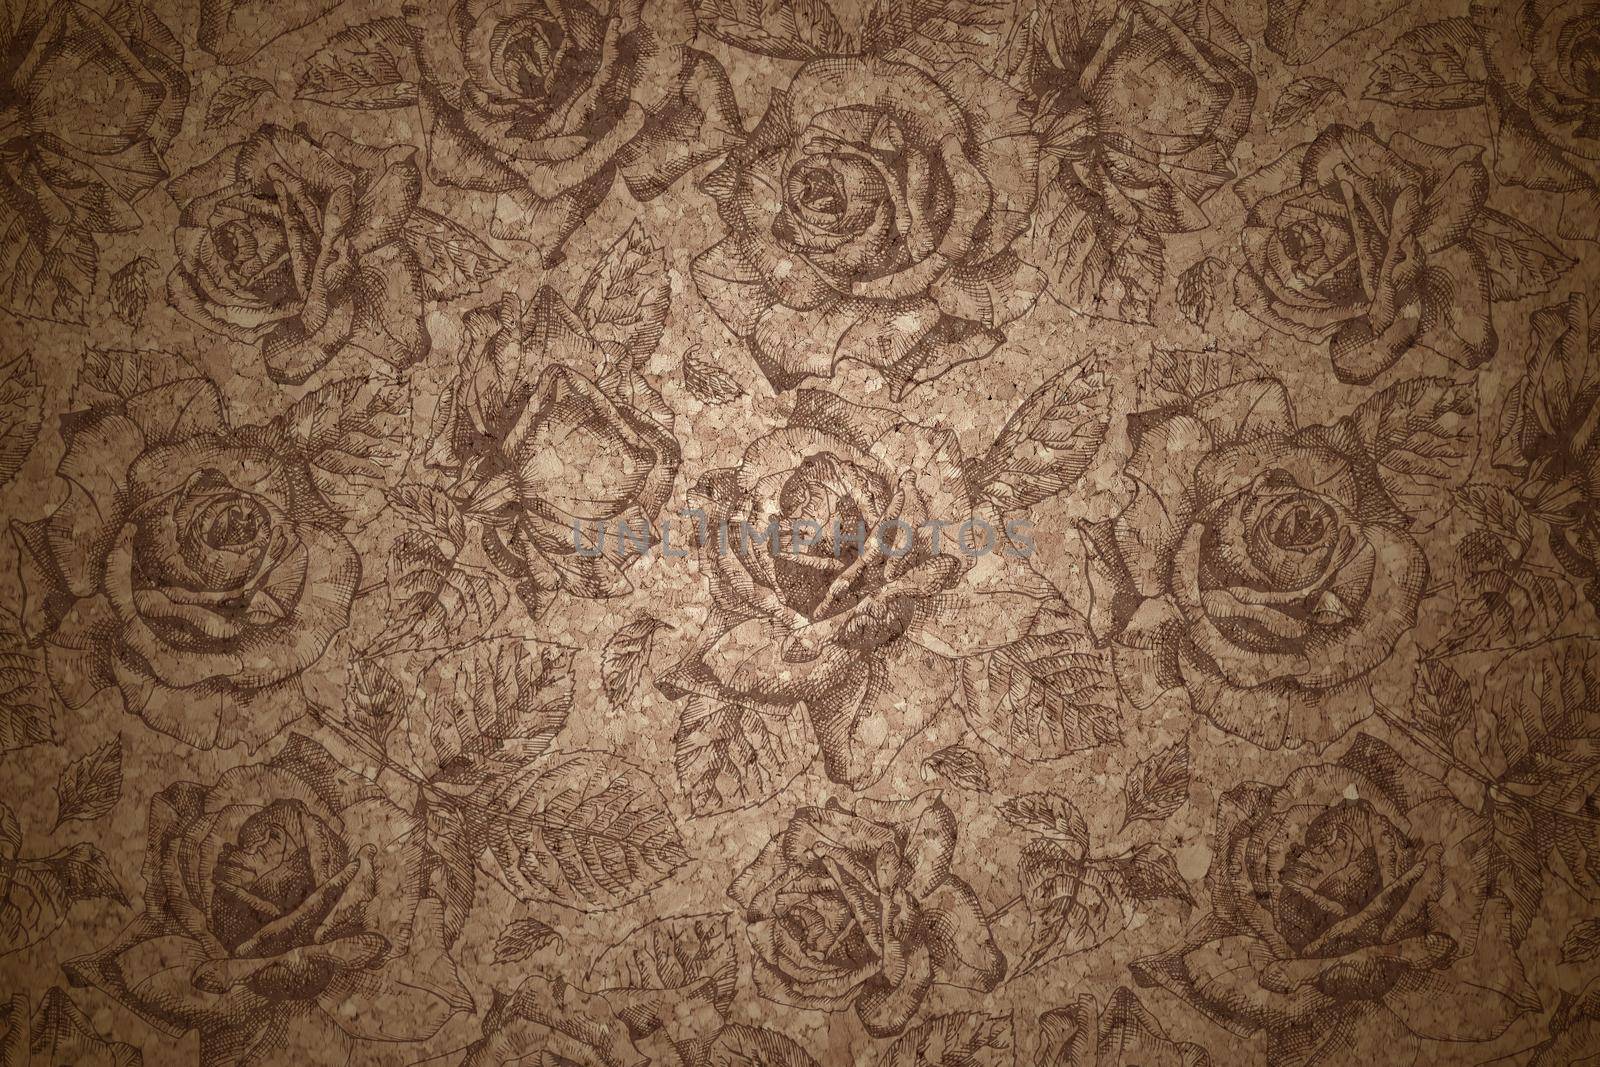 Fine Art Natural cork Textures with Hand drawn roses Flower overlay. Portrait Photo Floral Textures Backdrop Digital Studio Background, Best for cute family photos, atmospheric newborn designs, poster